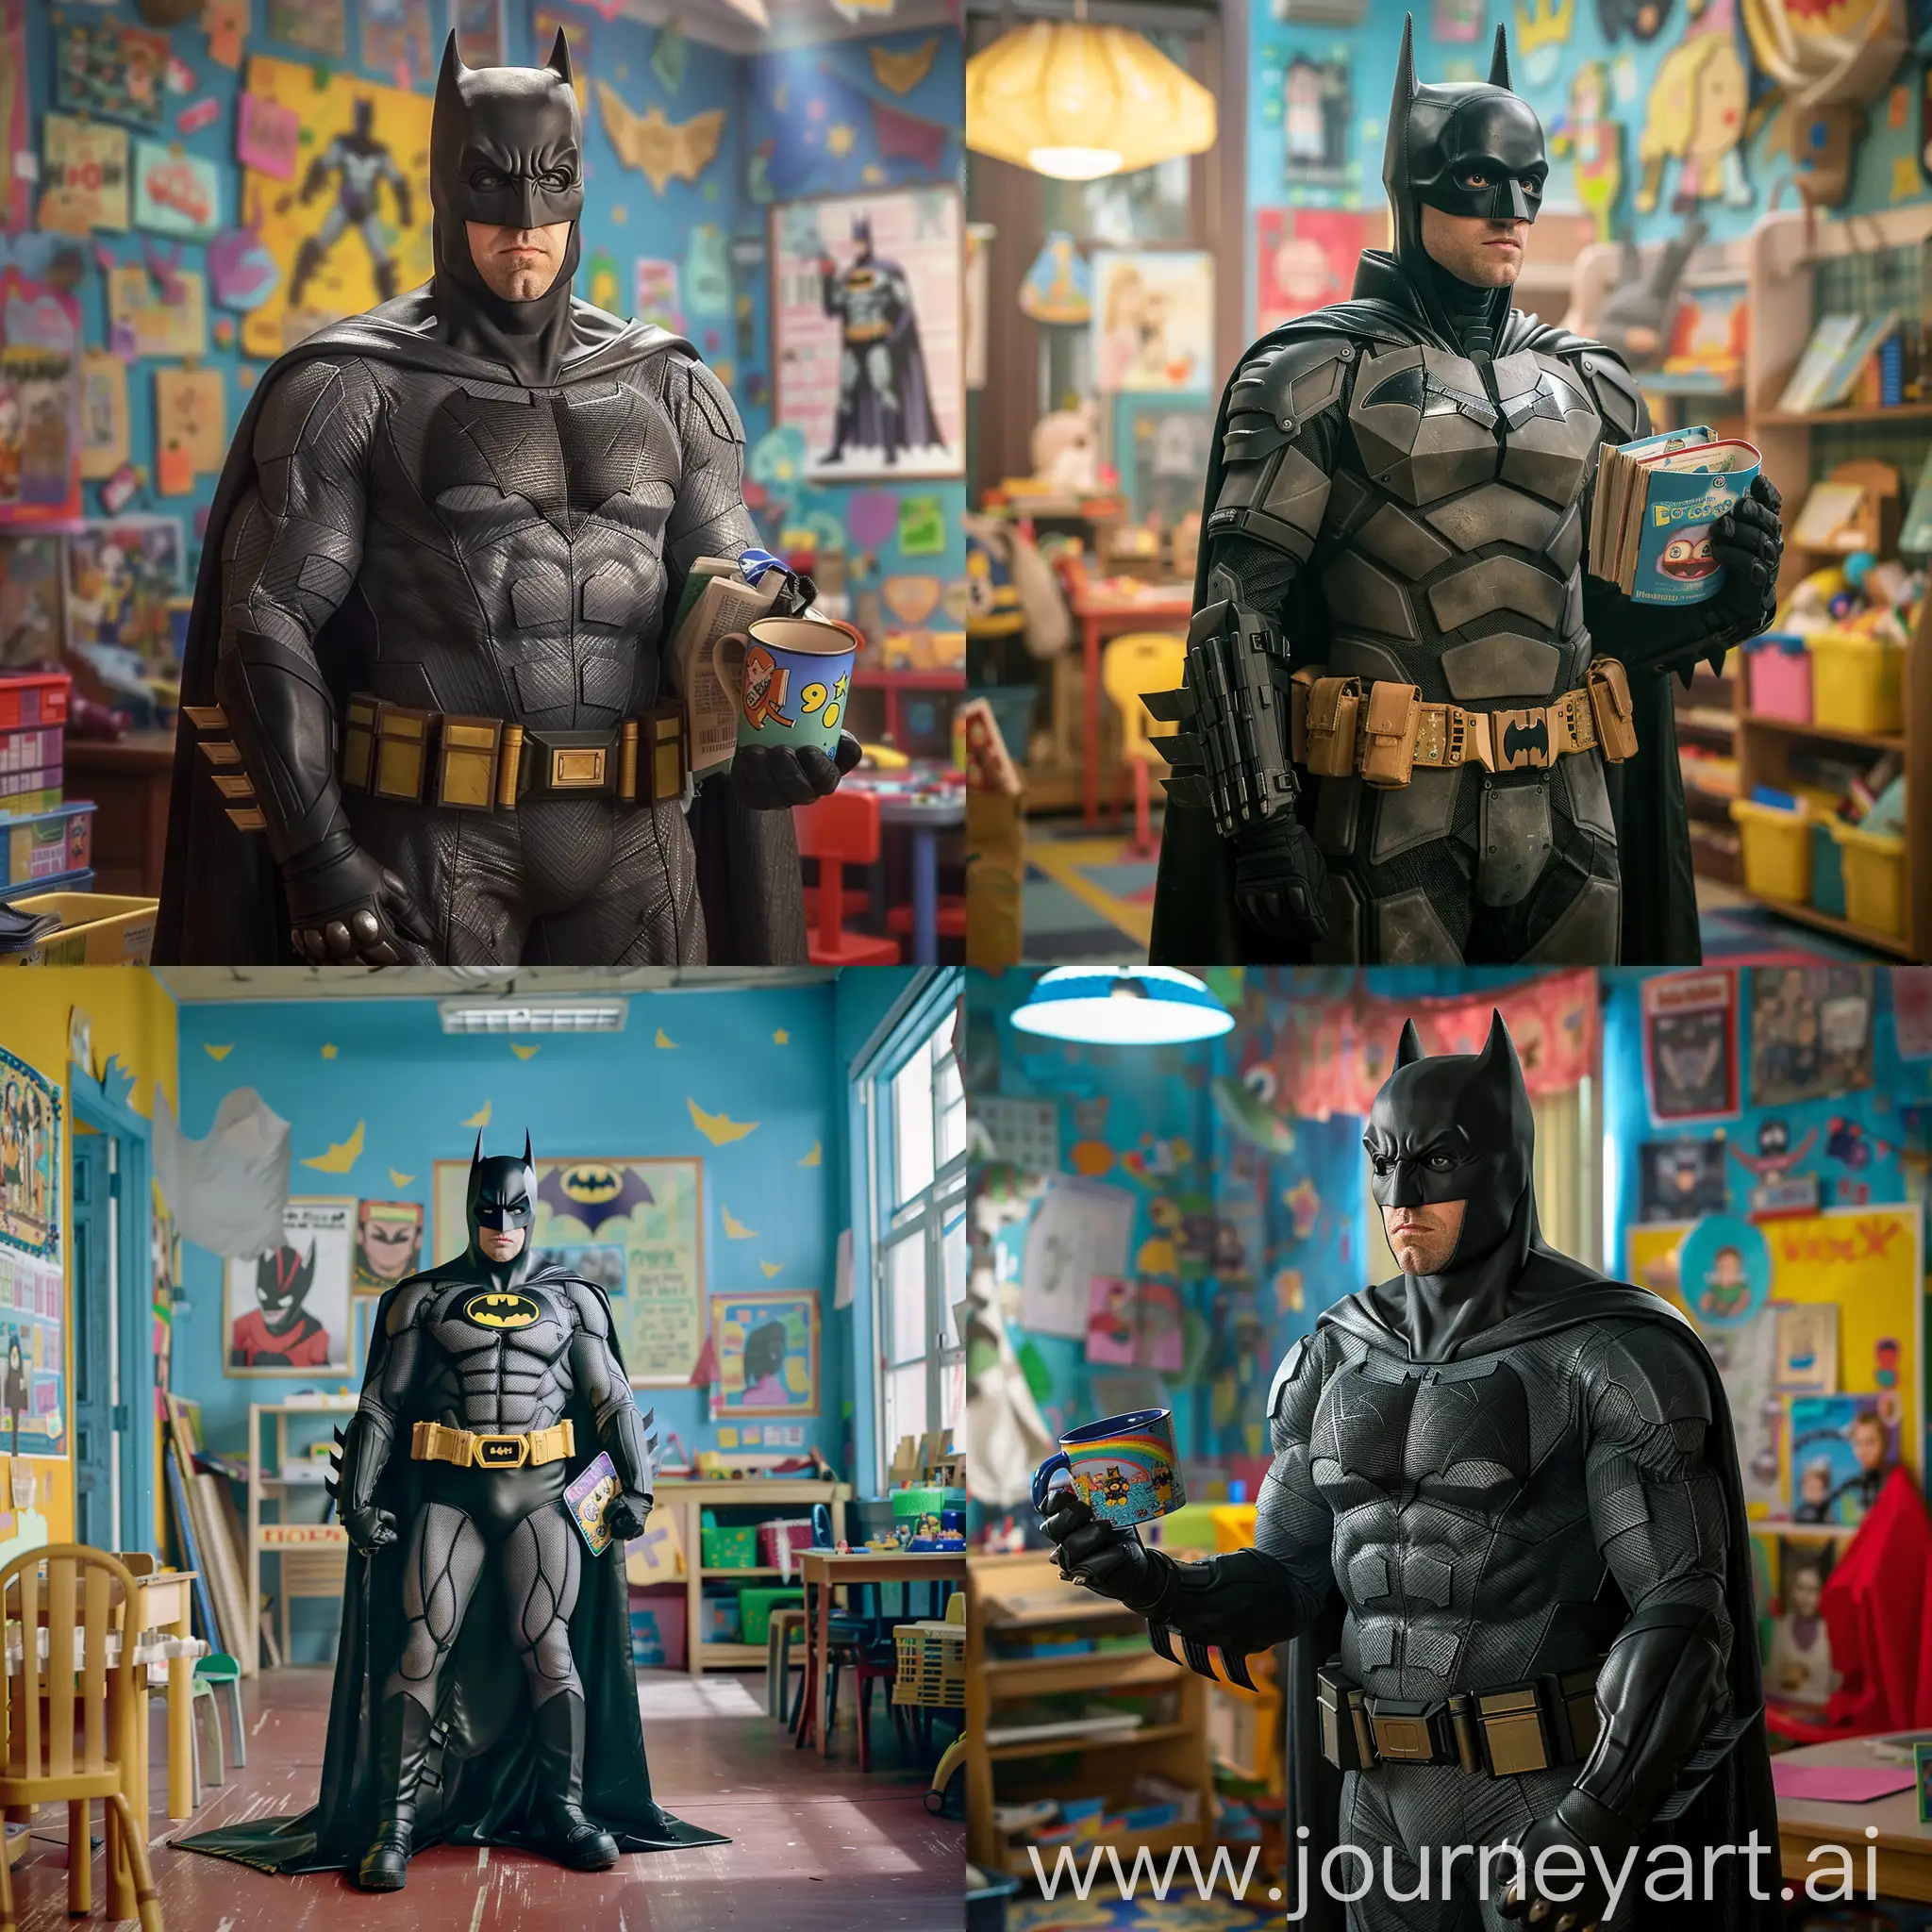 Ryan Gosling as Batman stands in a bright and colorful kindergarten classroom. He's wearing his Batman costume but also has a school bag slung over one shoulder and a whimsical mug in one hand. In the other hand, he holds a playful children's book. In the background, there's a large, funny poster featuring Batman. The kindergarten is filled with vibrant, child-like art, toys, and educational materials, creating a lively and engaging setting for this unconventional superhero moment 